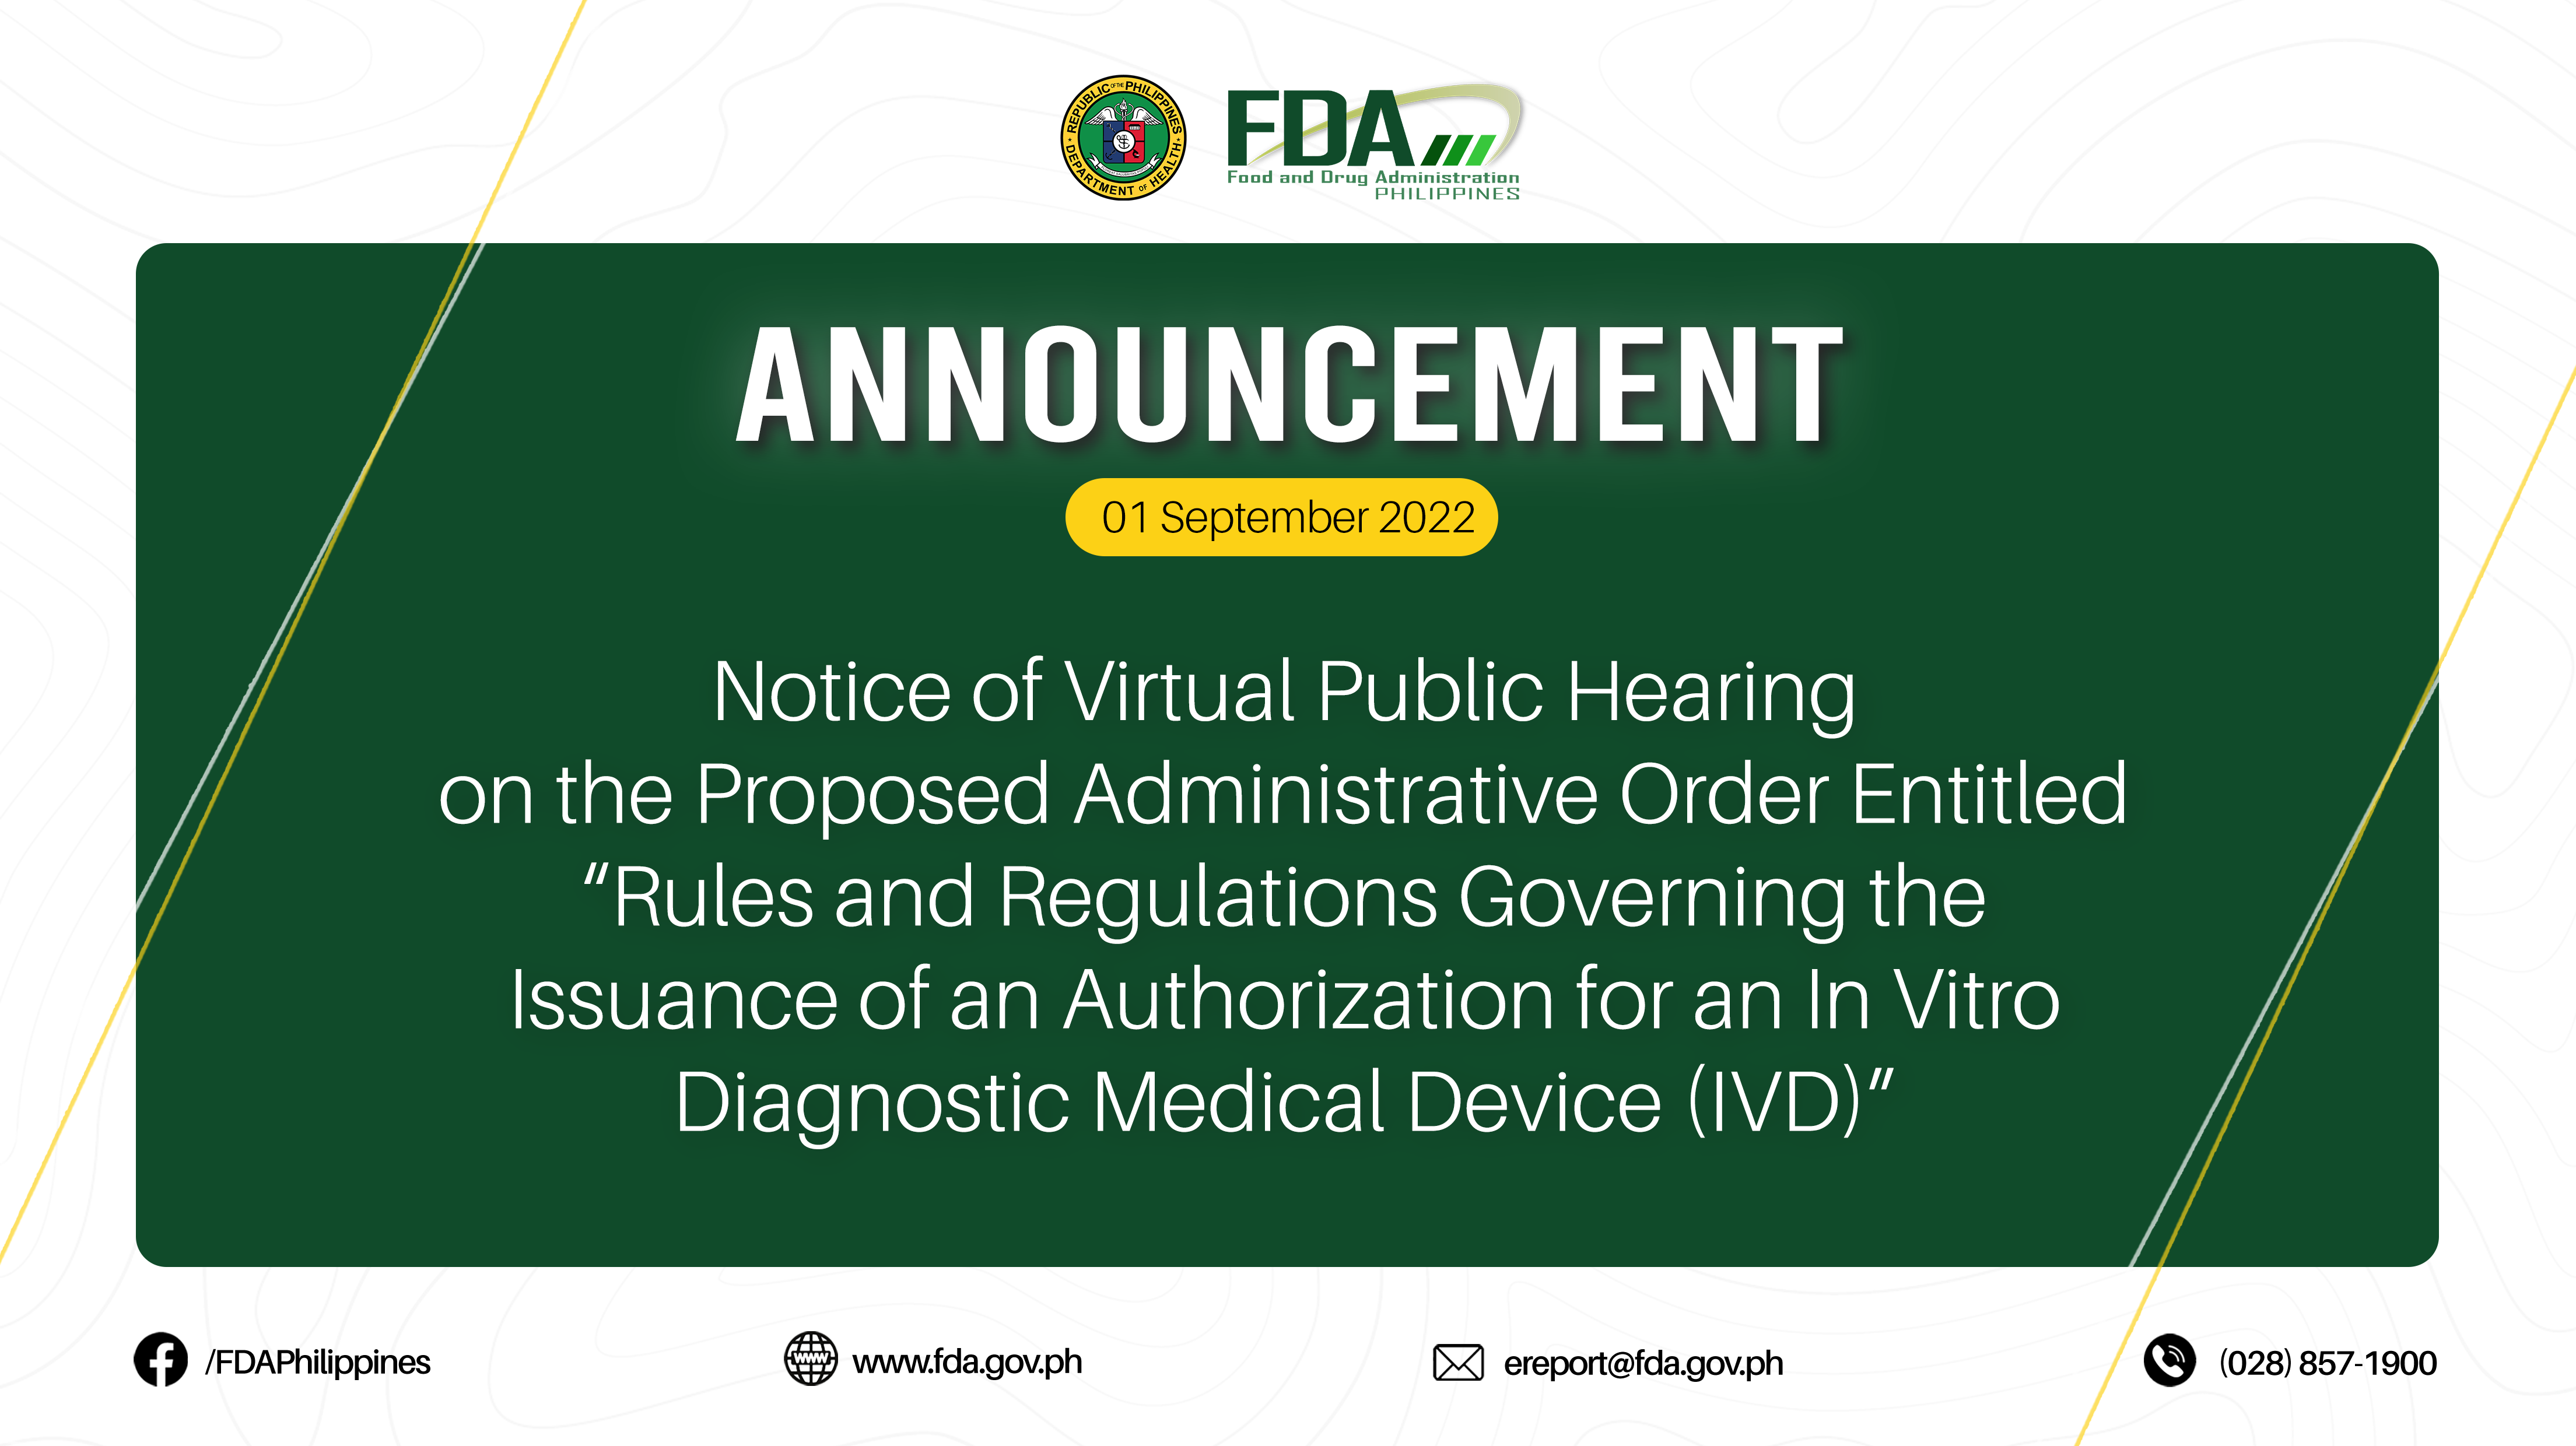 Announcement || Notice of Virtual Public Hearing on the Proposed Administrative Order Entitled “Rules and Regulations Governing the Issuance of an Authorization for an In Vitro Diagnostic Medical Device (IVD)”